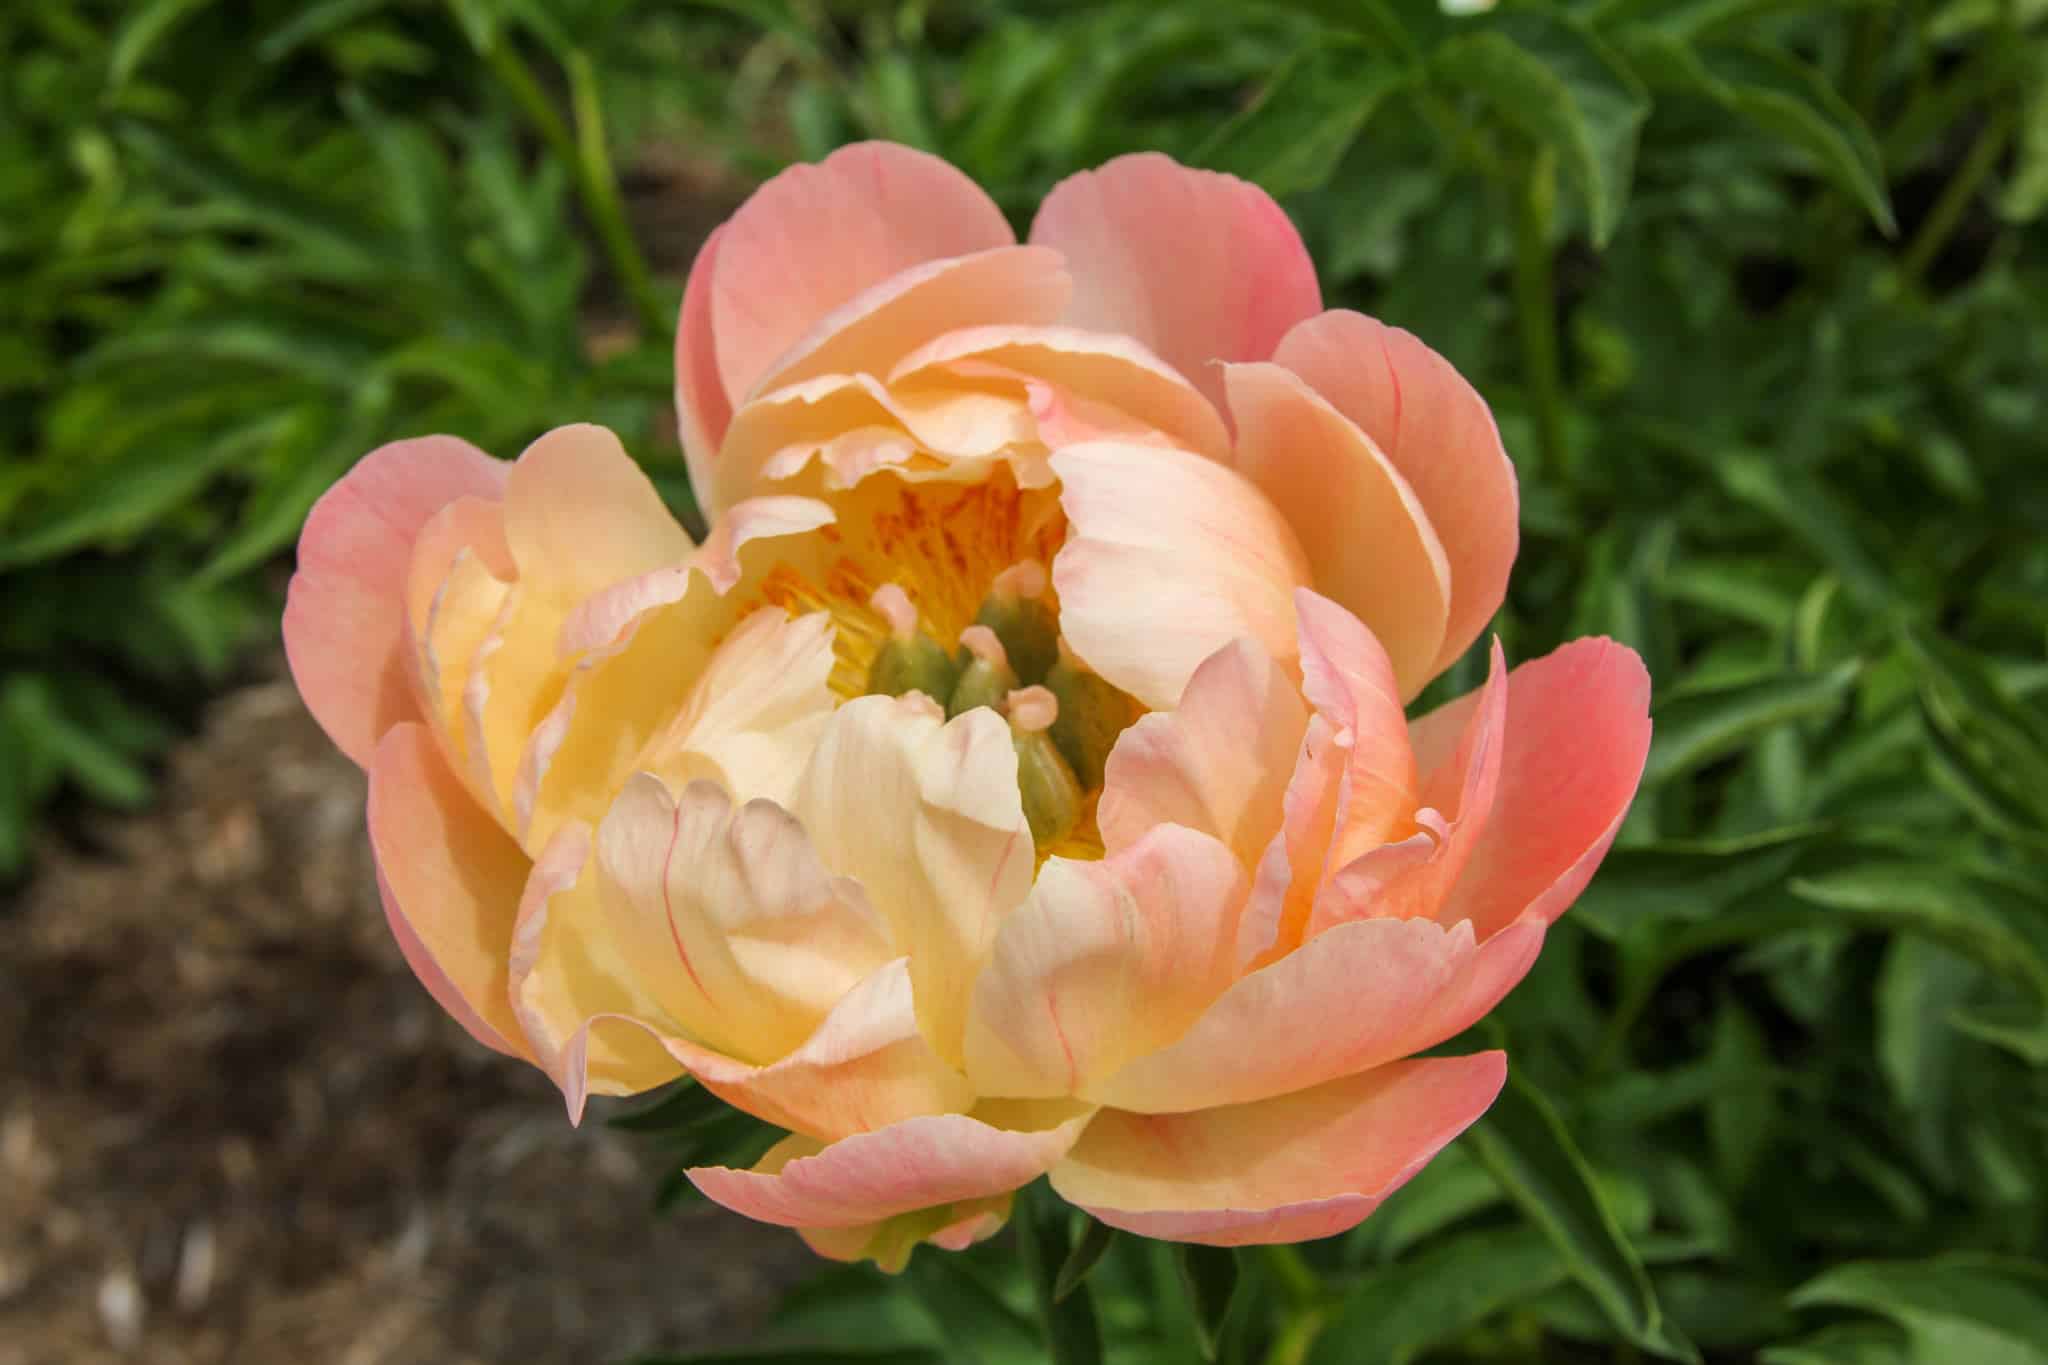 Visiting the Peony Festival in Oshawa is one of the things to do in Ontario in spring